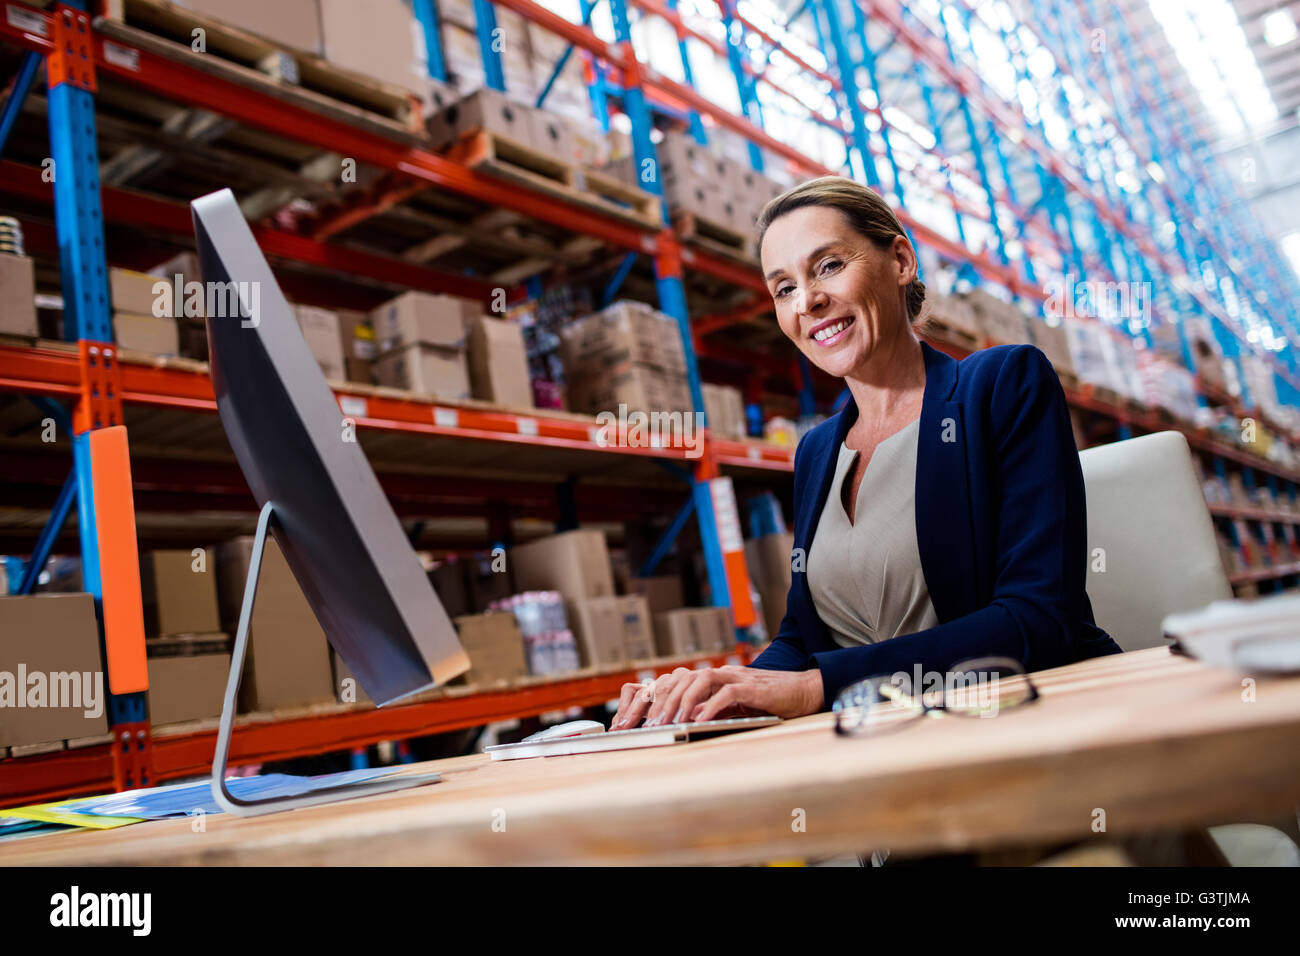 Warehouse manager using a laptop Stock Photo